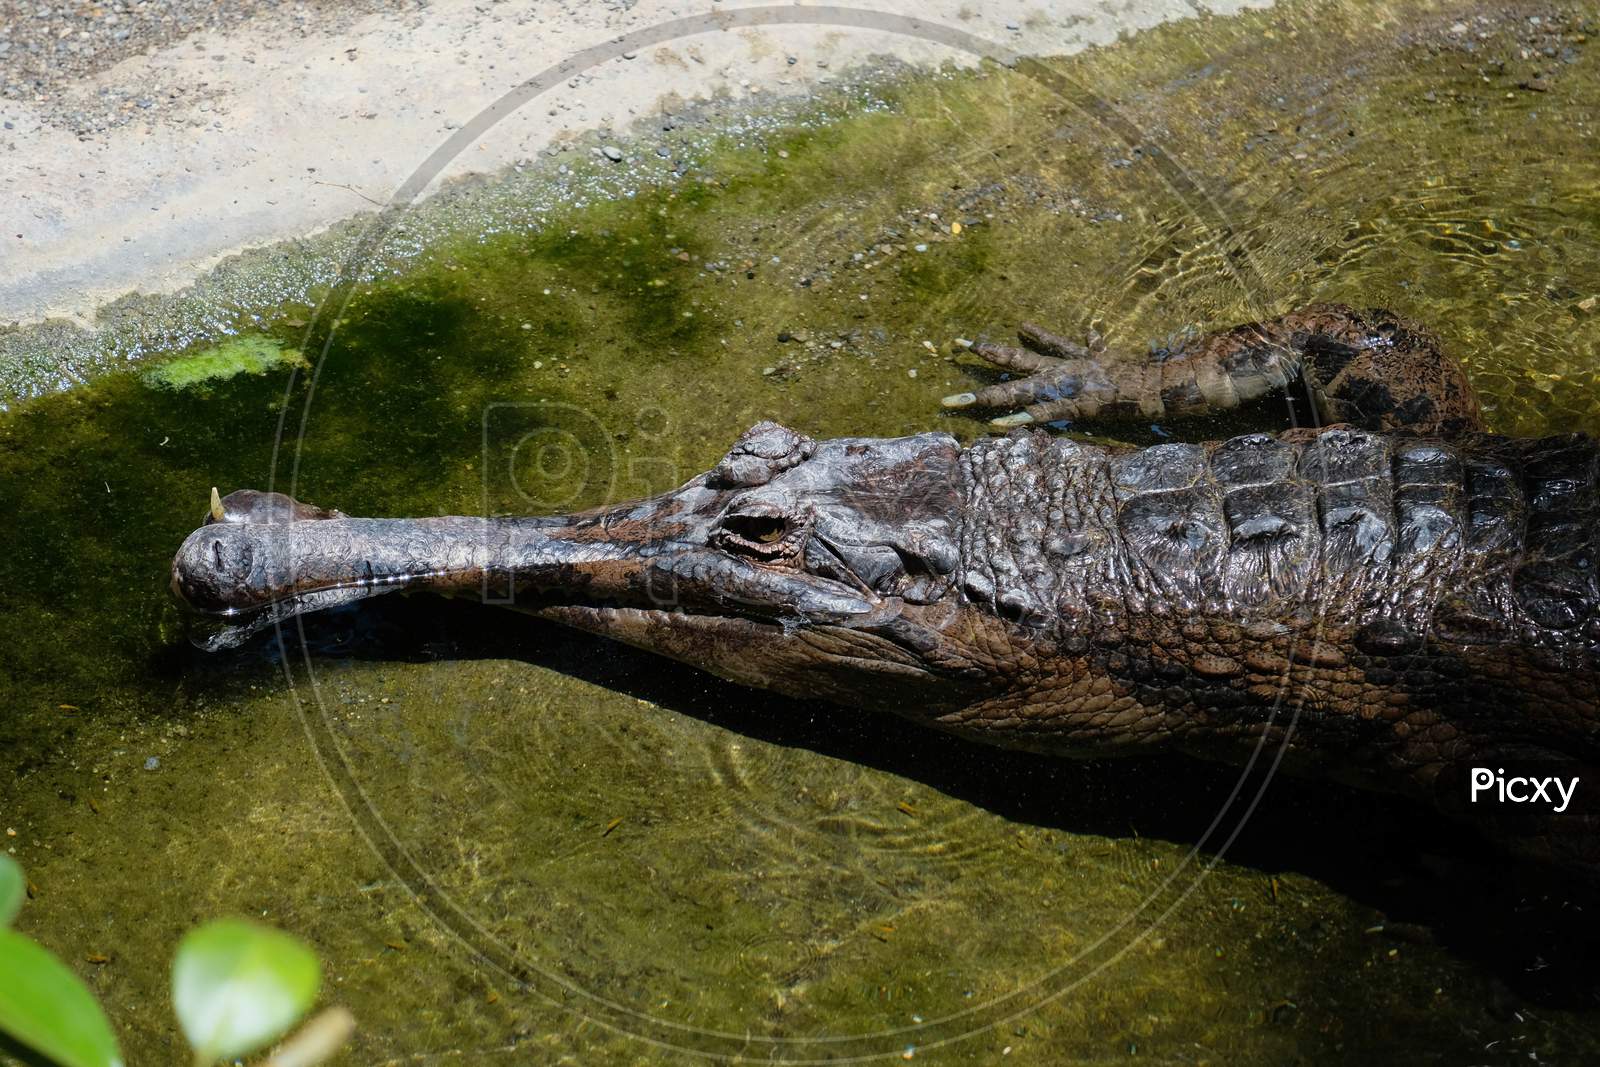 Fuengirola, Andalucia/Spain - July 4 : Tomistoma (Tomistoma Schlegelii) Resting At The Bioparc Fuengirola Costa Del Sol Spain On July 4, 2017